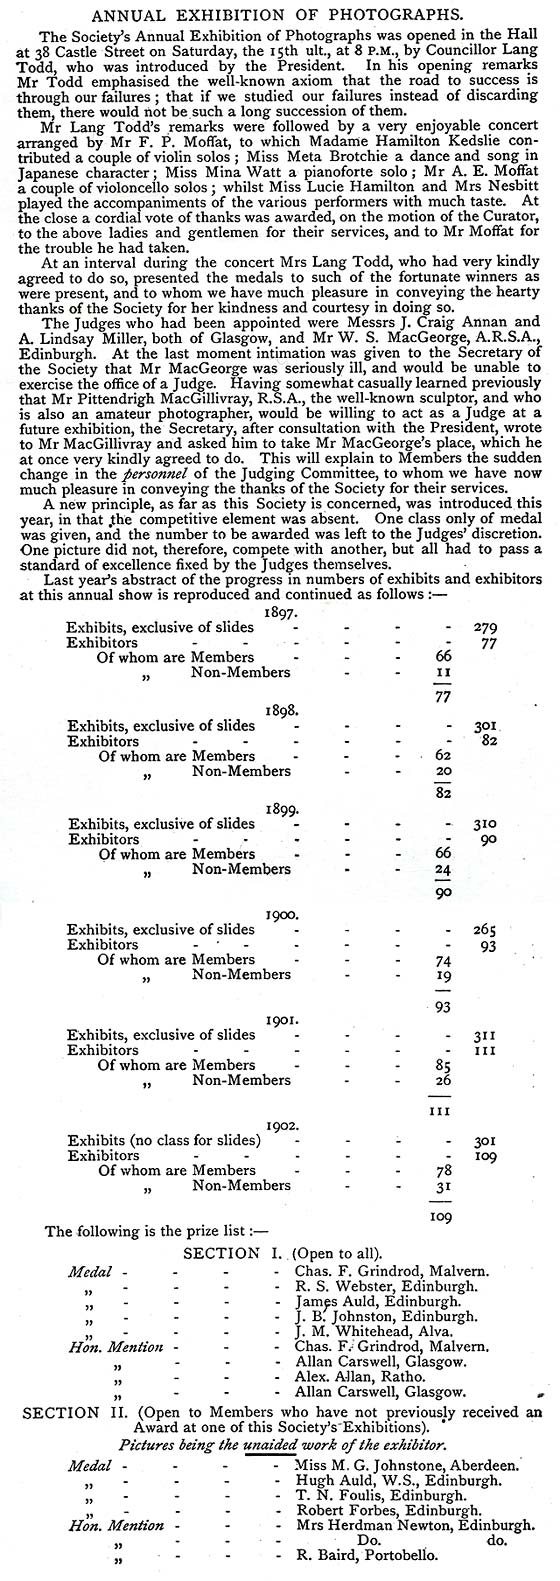 Report of the EPS Exhibition held in February 1902, including numbers for some previous years' exhibitions